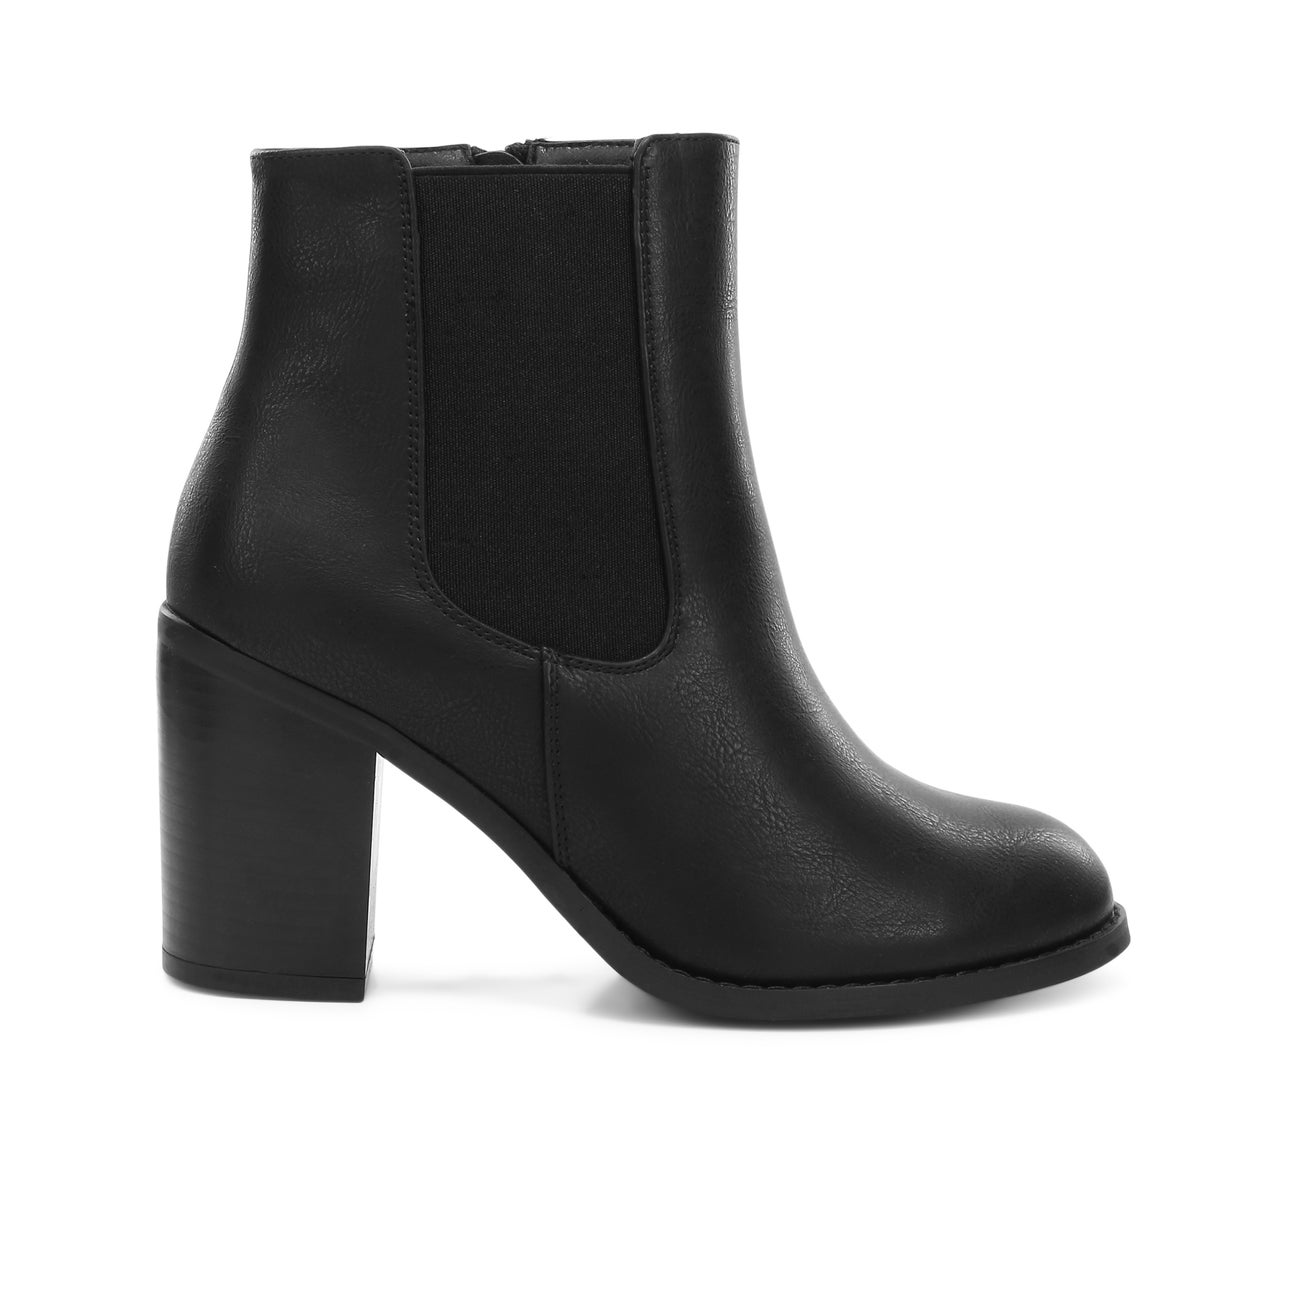 Tamaris Women Boots Heeled Ankle Boots